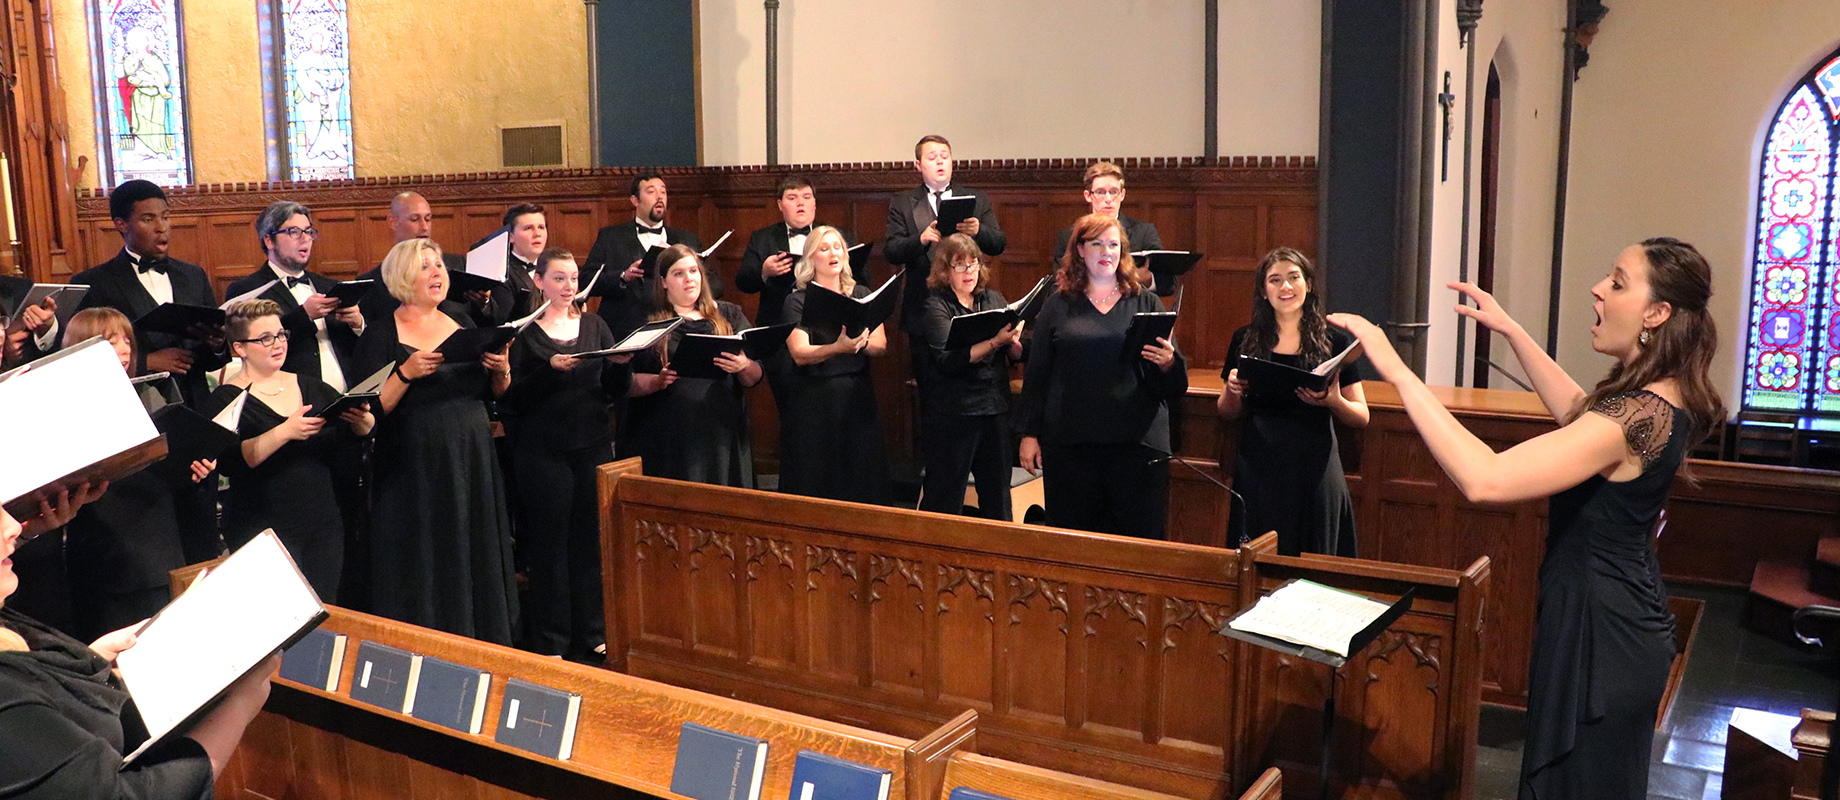 Simpson College to celebrate choral conducting graduating class